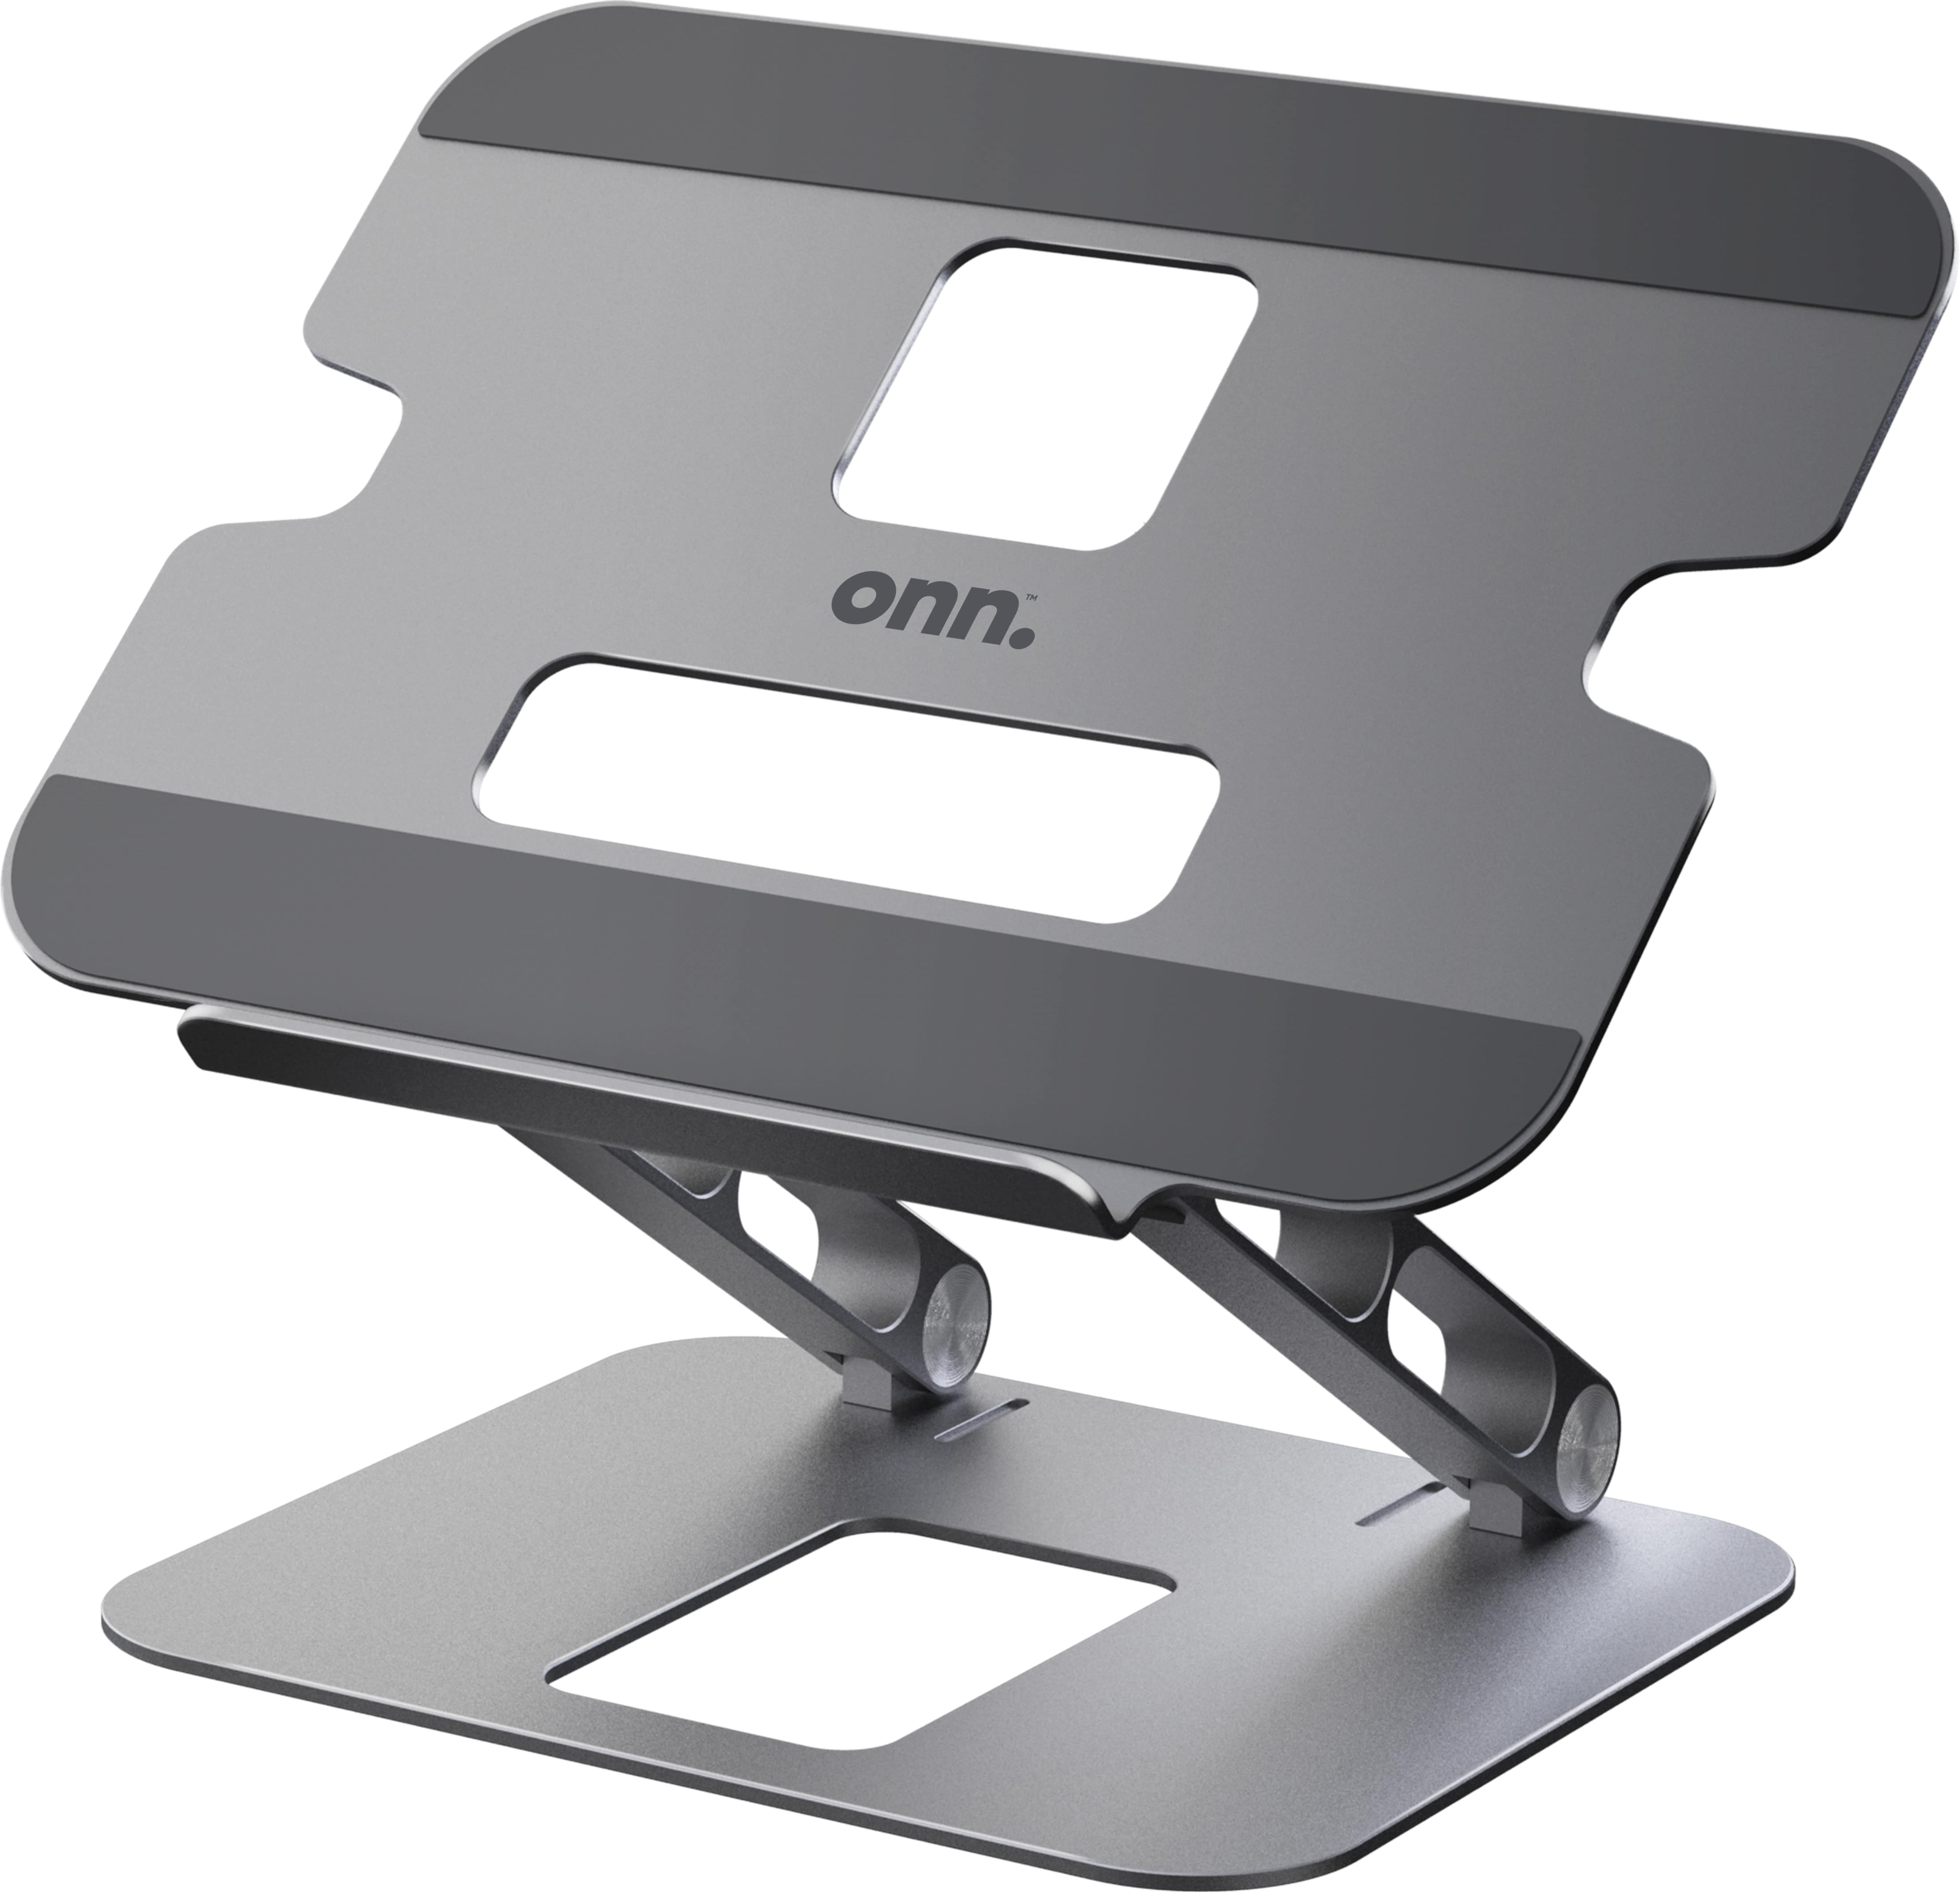 onn. Multi-Angle Laptop Stand - image 1 of 6